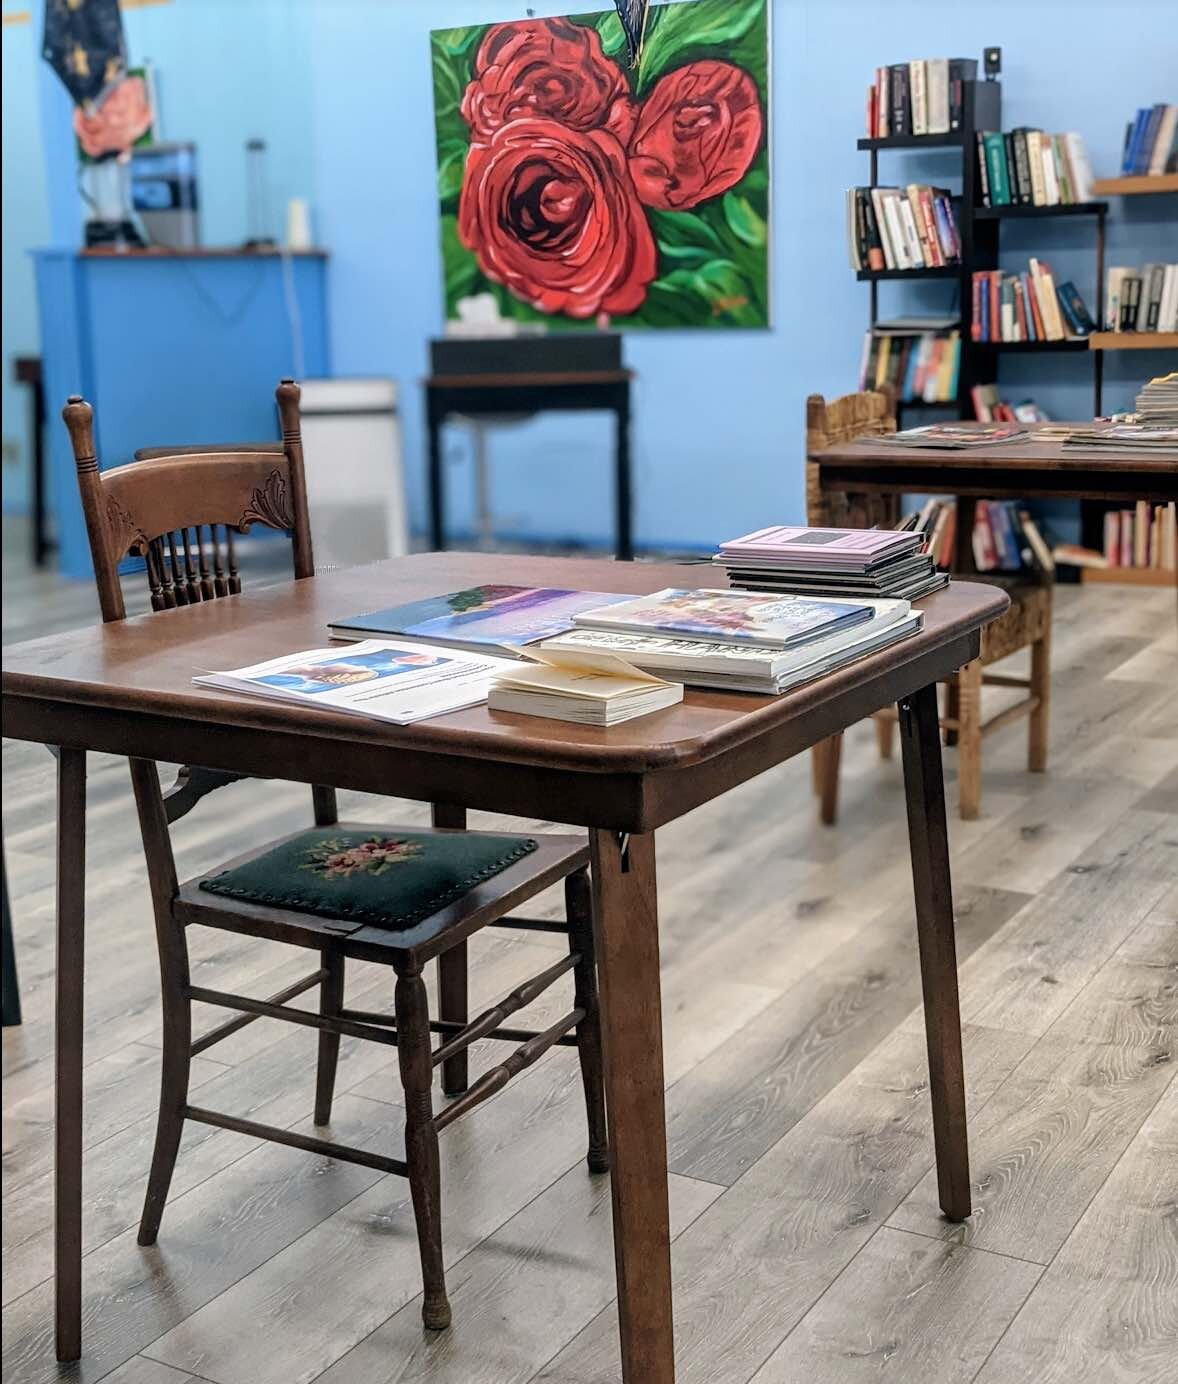 table and library.jpg